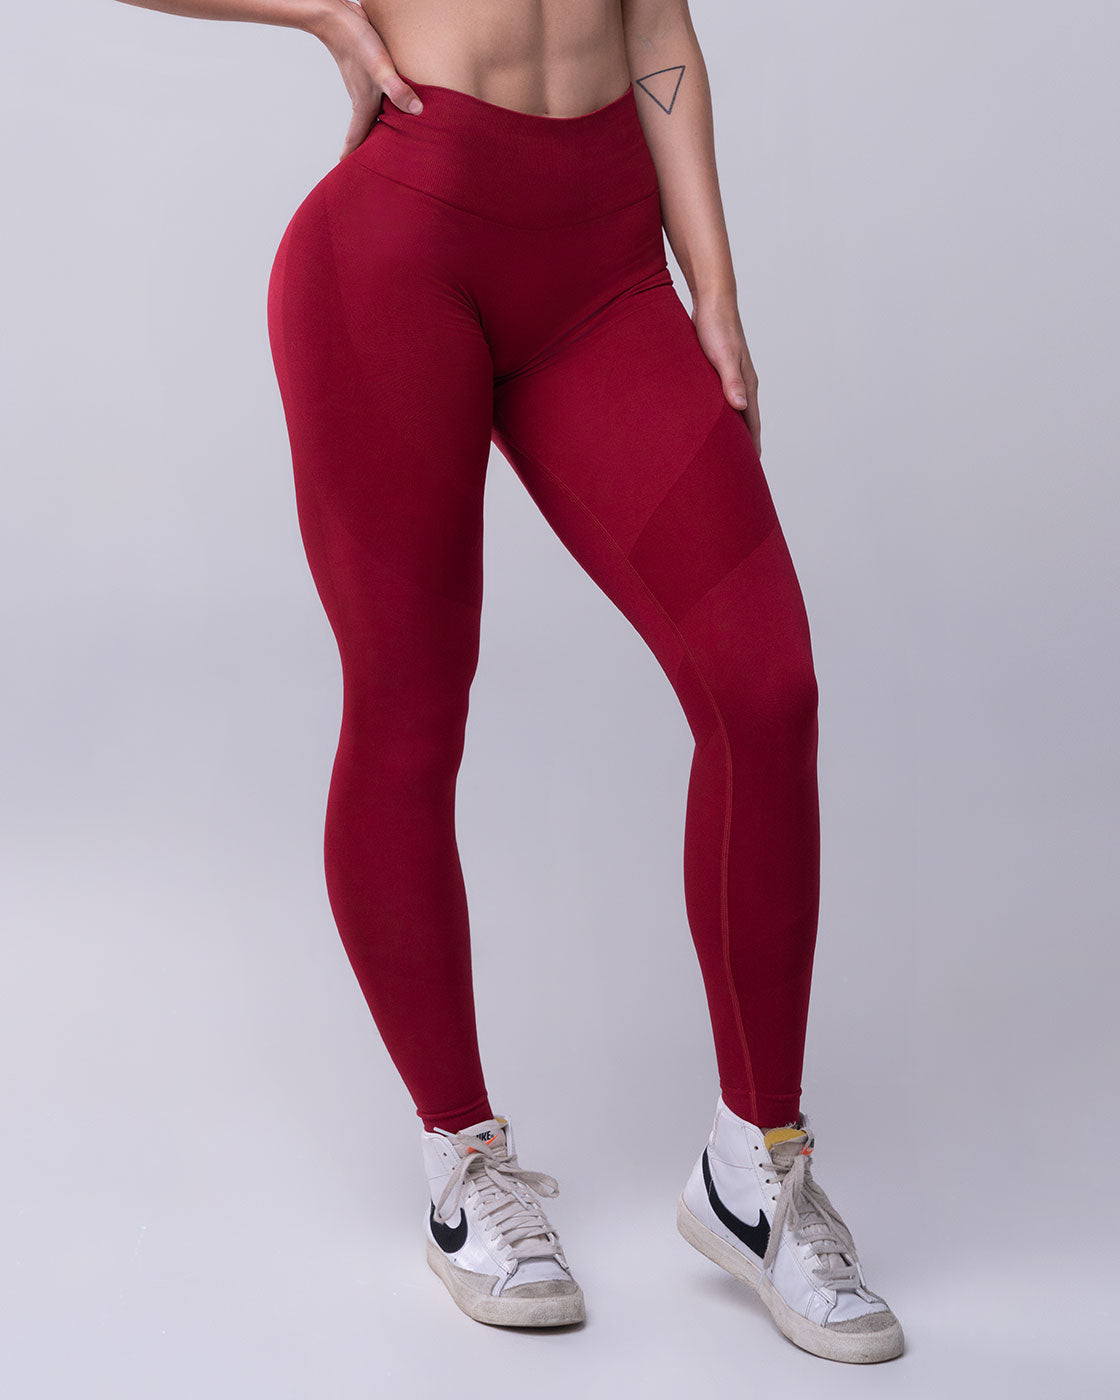 SPANX ASSETS High Waist Shaping Leggings Ultimate Shaping Women's S Dk  Maroon